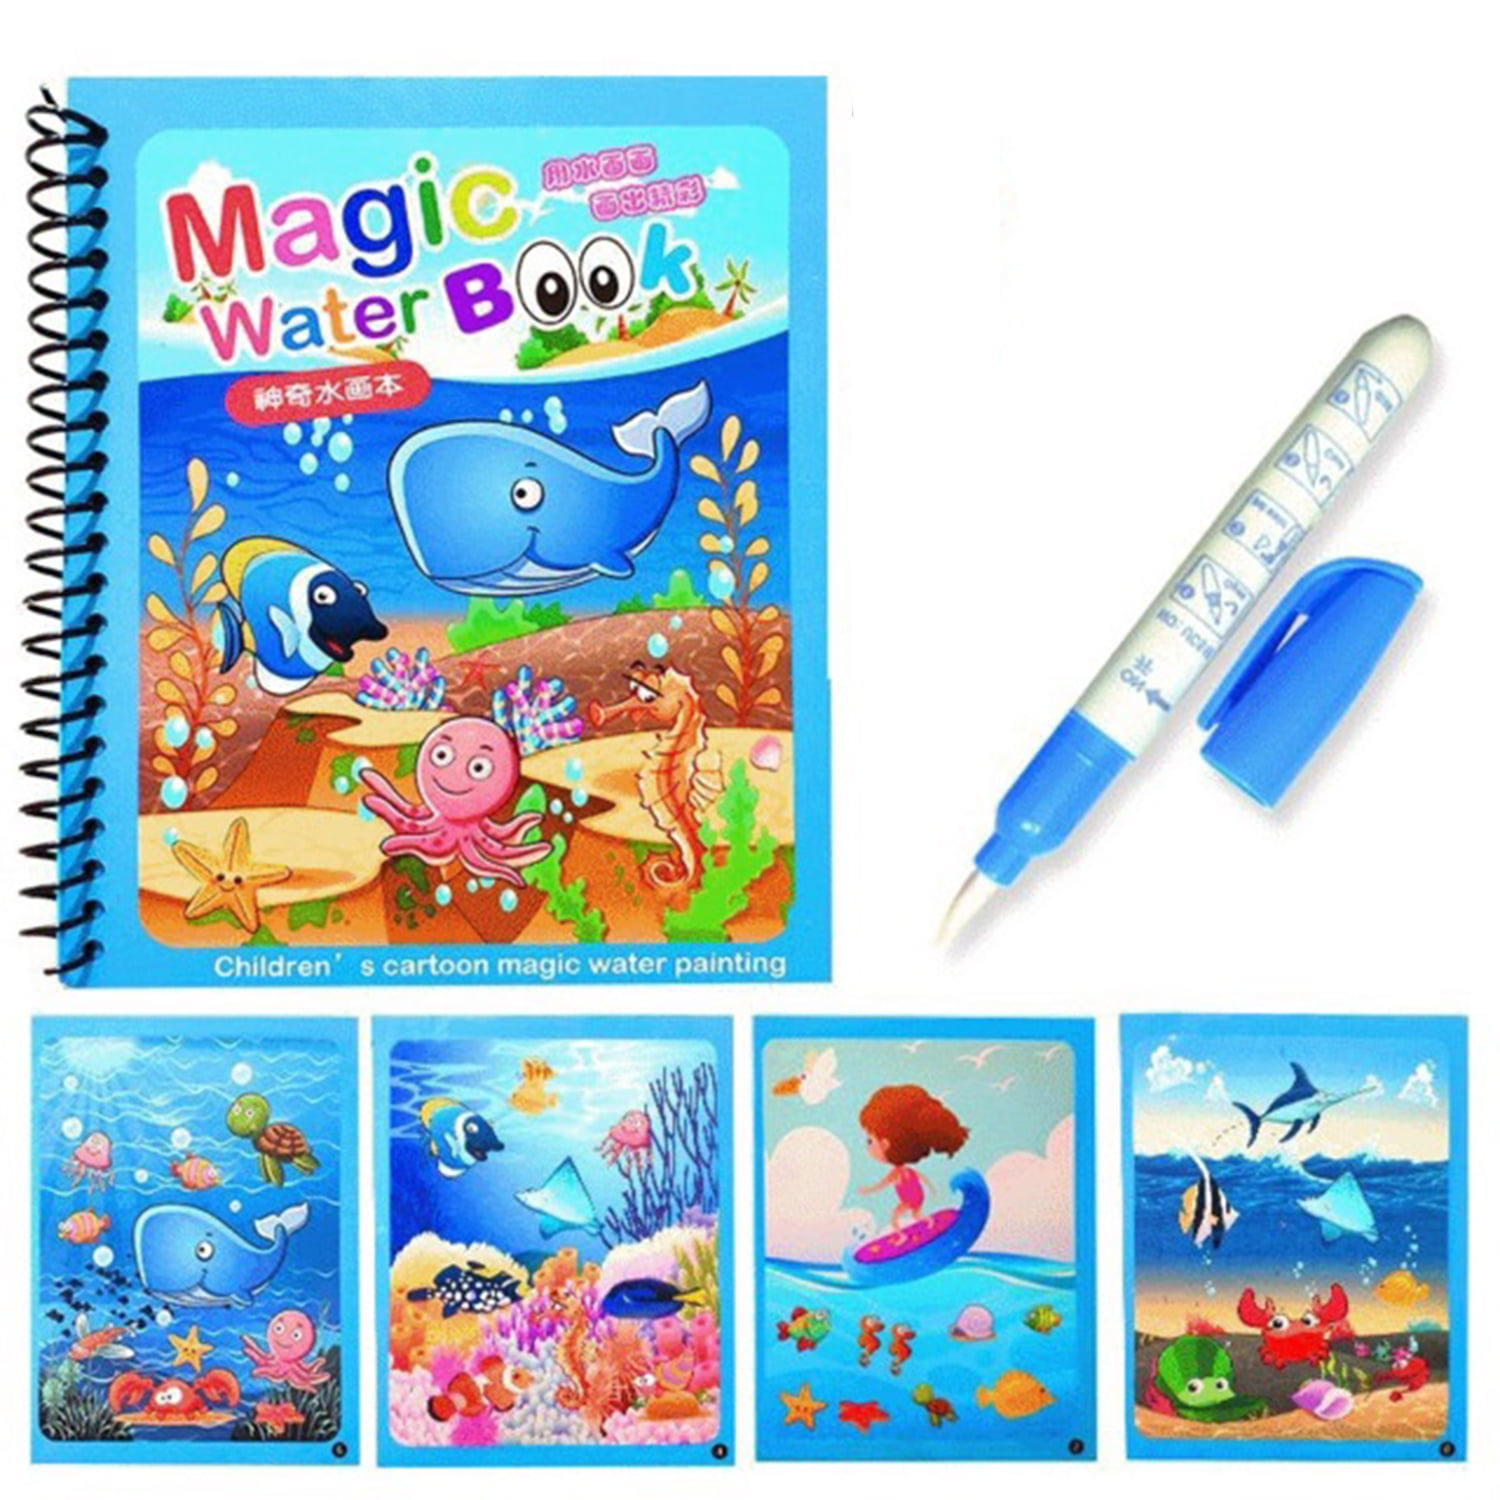 WATER COLOR PAINT Art Crafts Water Coloring Book Water Coloring Books for  Kids $9.16 - PicClick AU